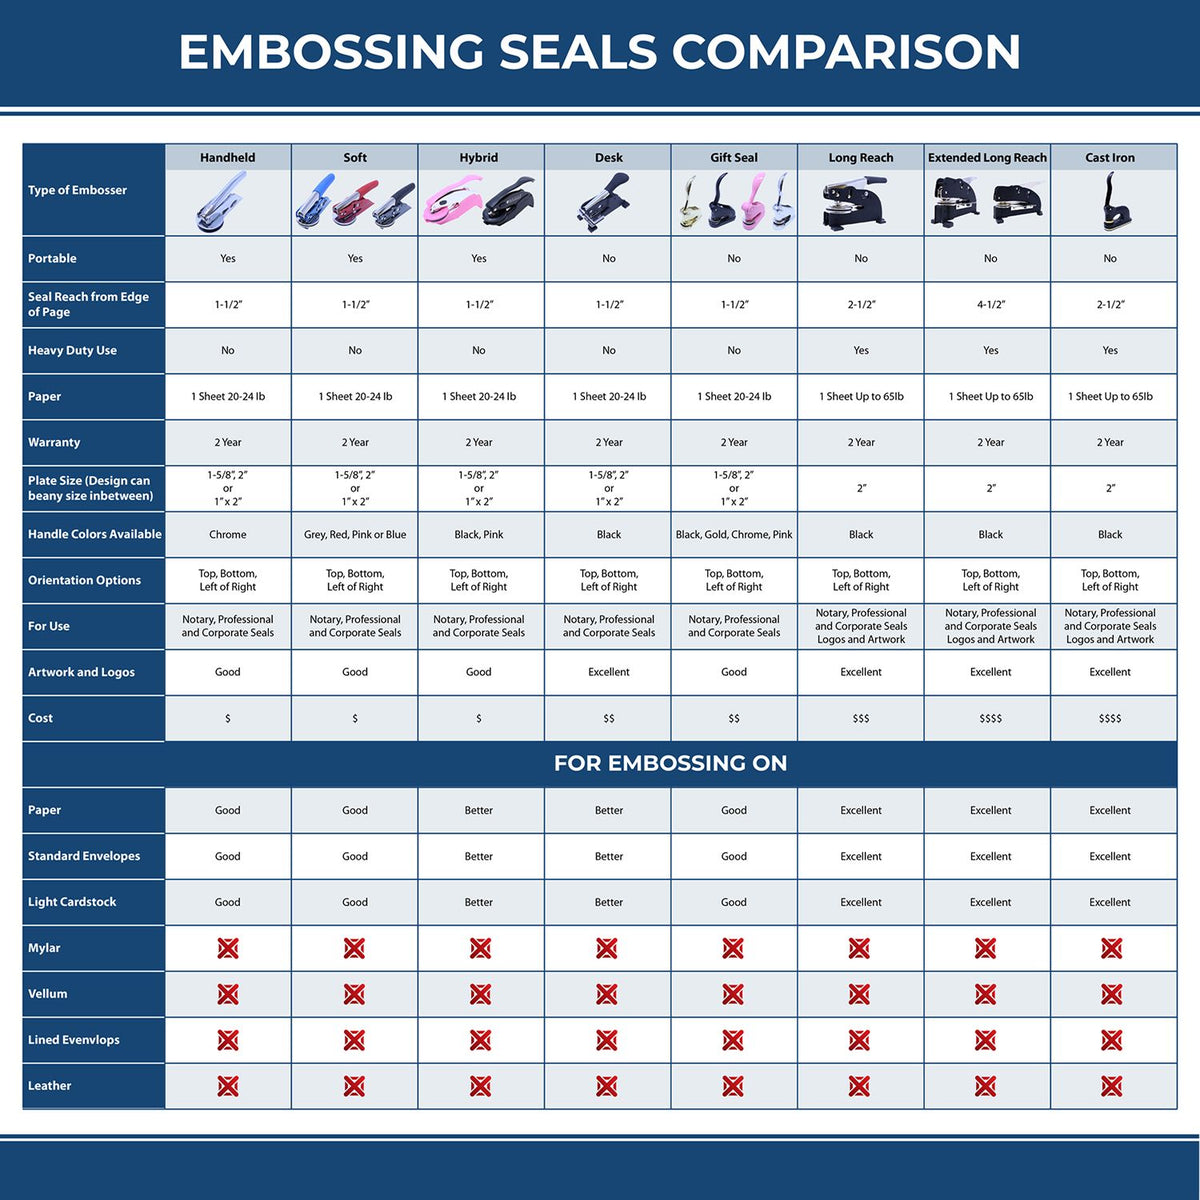 A comparison chart for the different types of mount models available for the Soft Michigan Professional Geologist Seal